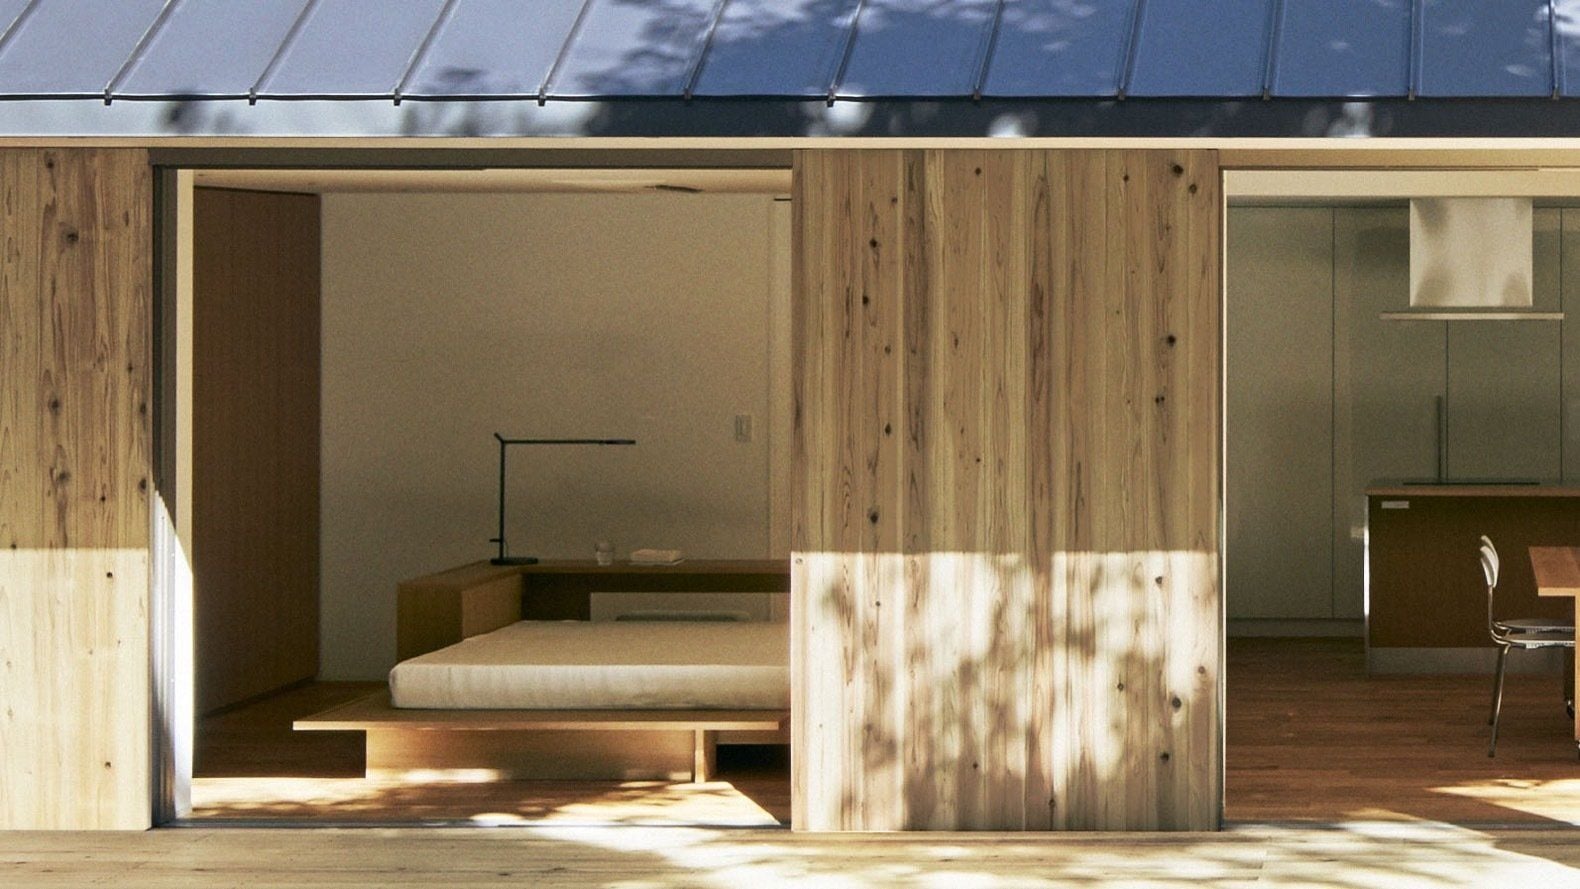 Large open doorways and sliding glass panels foster a constant connection between the Yō No Le House and the world outside.